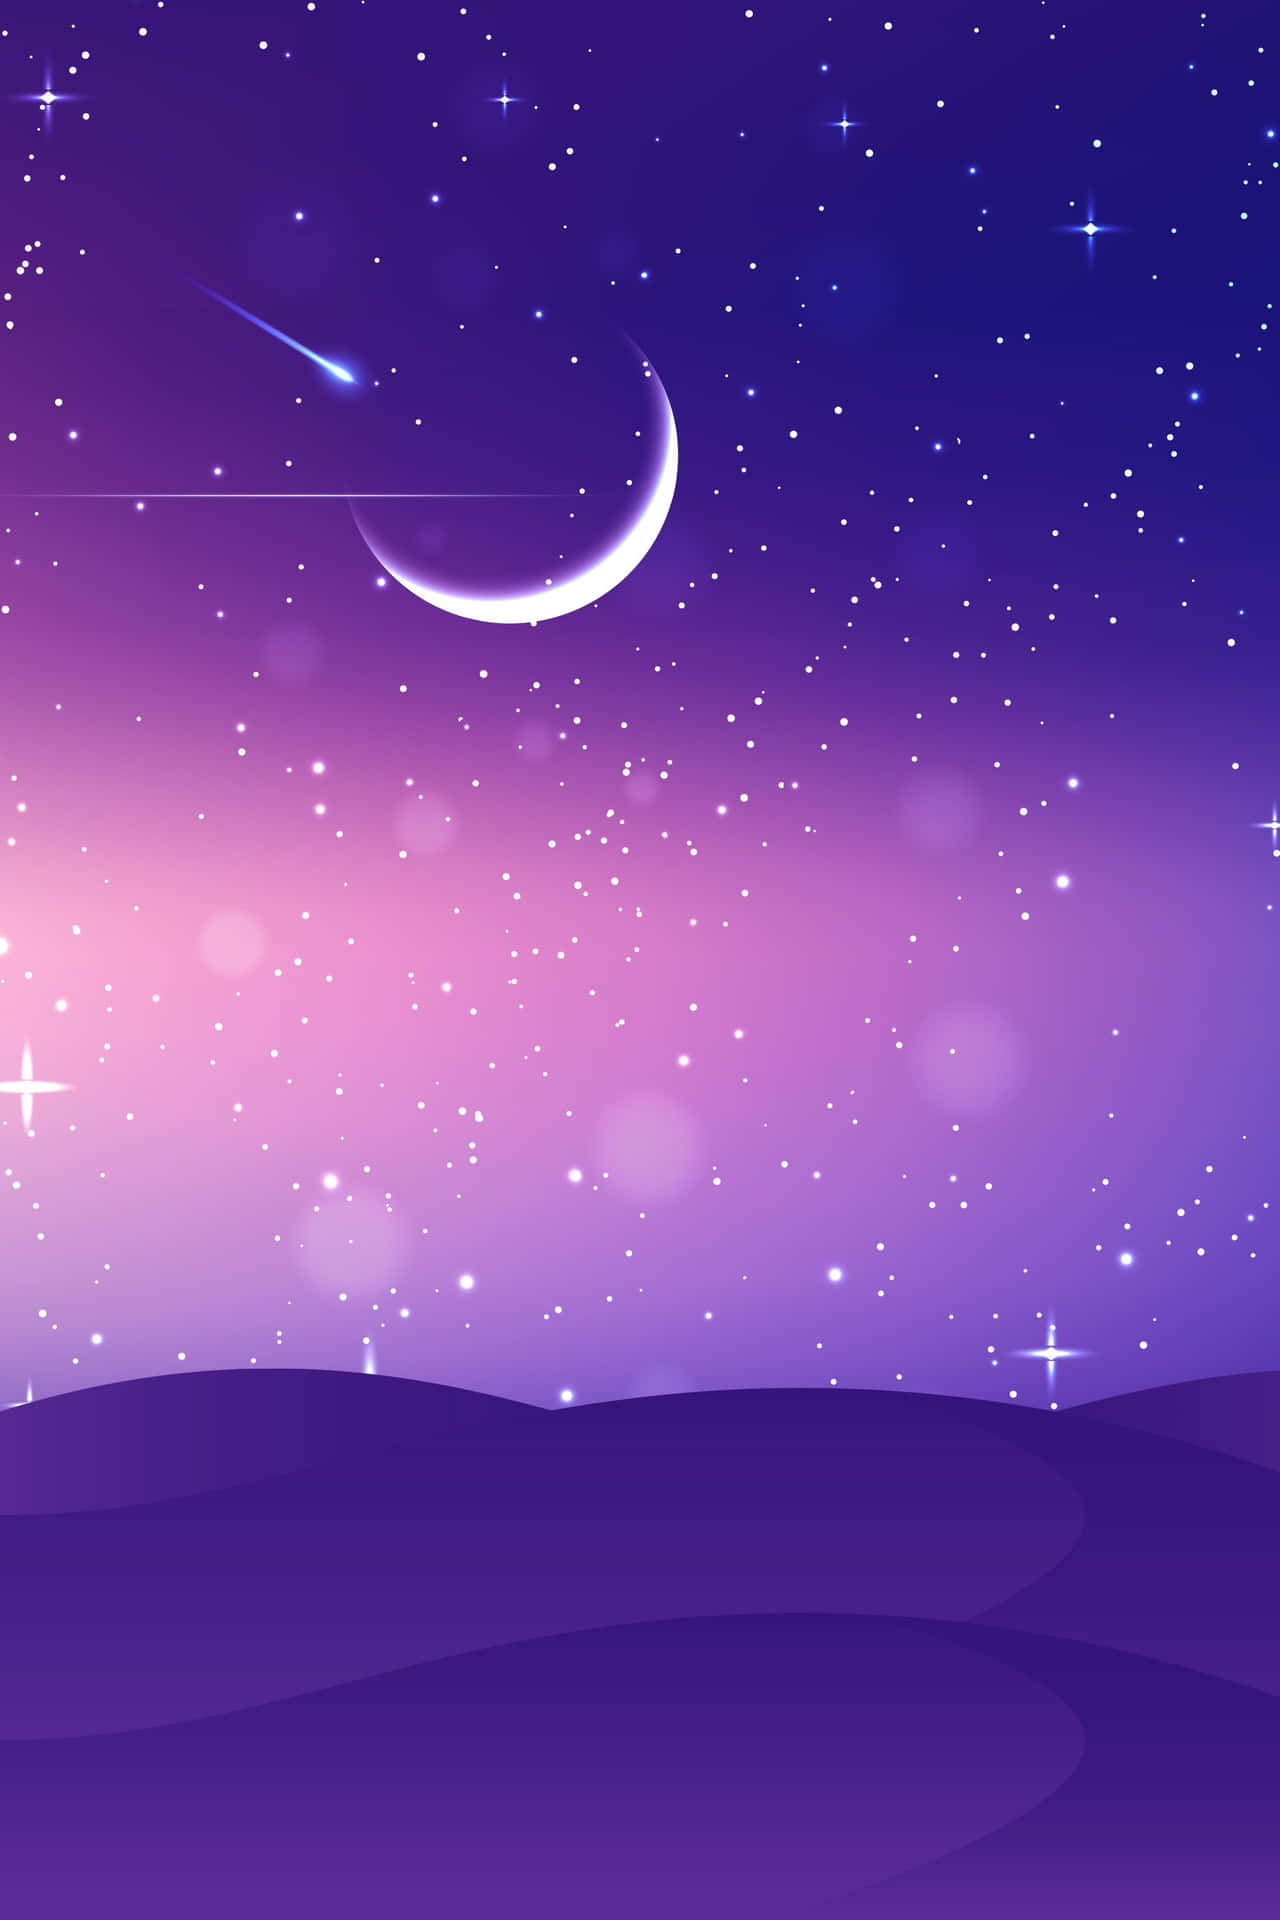 Download Aesthetic Purple Pink Night Sky Moon Picture | Wallpapers.com